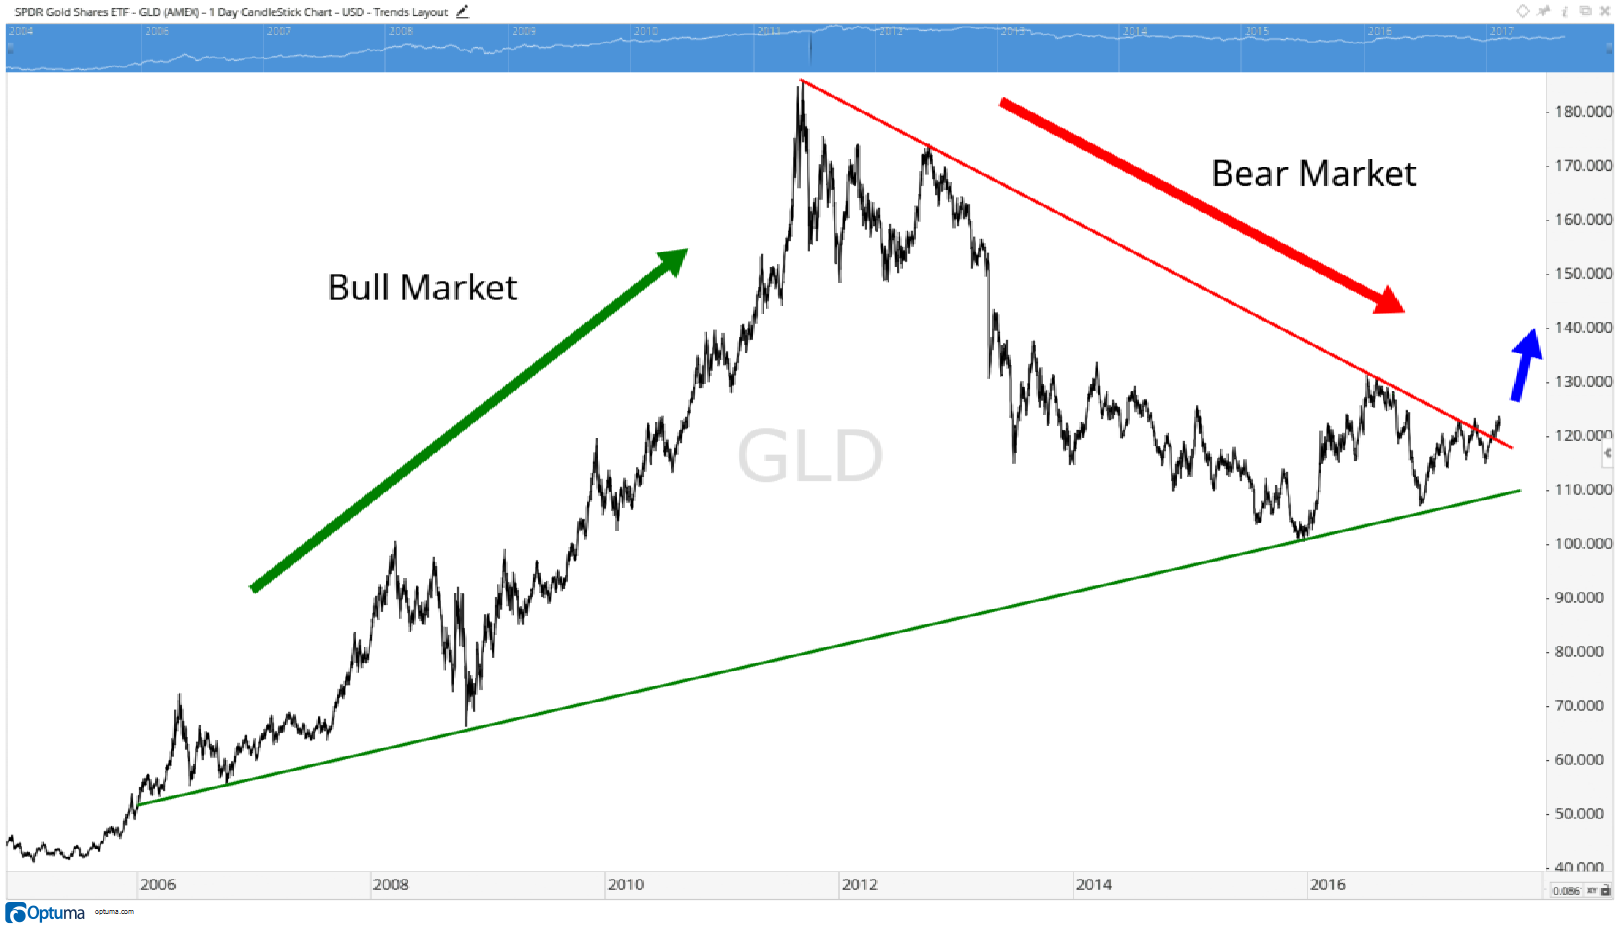 I have been watching the price of gold closely. And I couldn’t help but notice that we are on the cusp of a new multiyear rally for the precious metal.